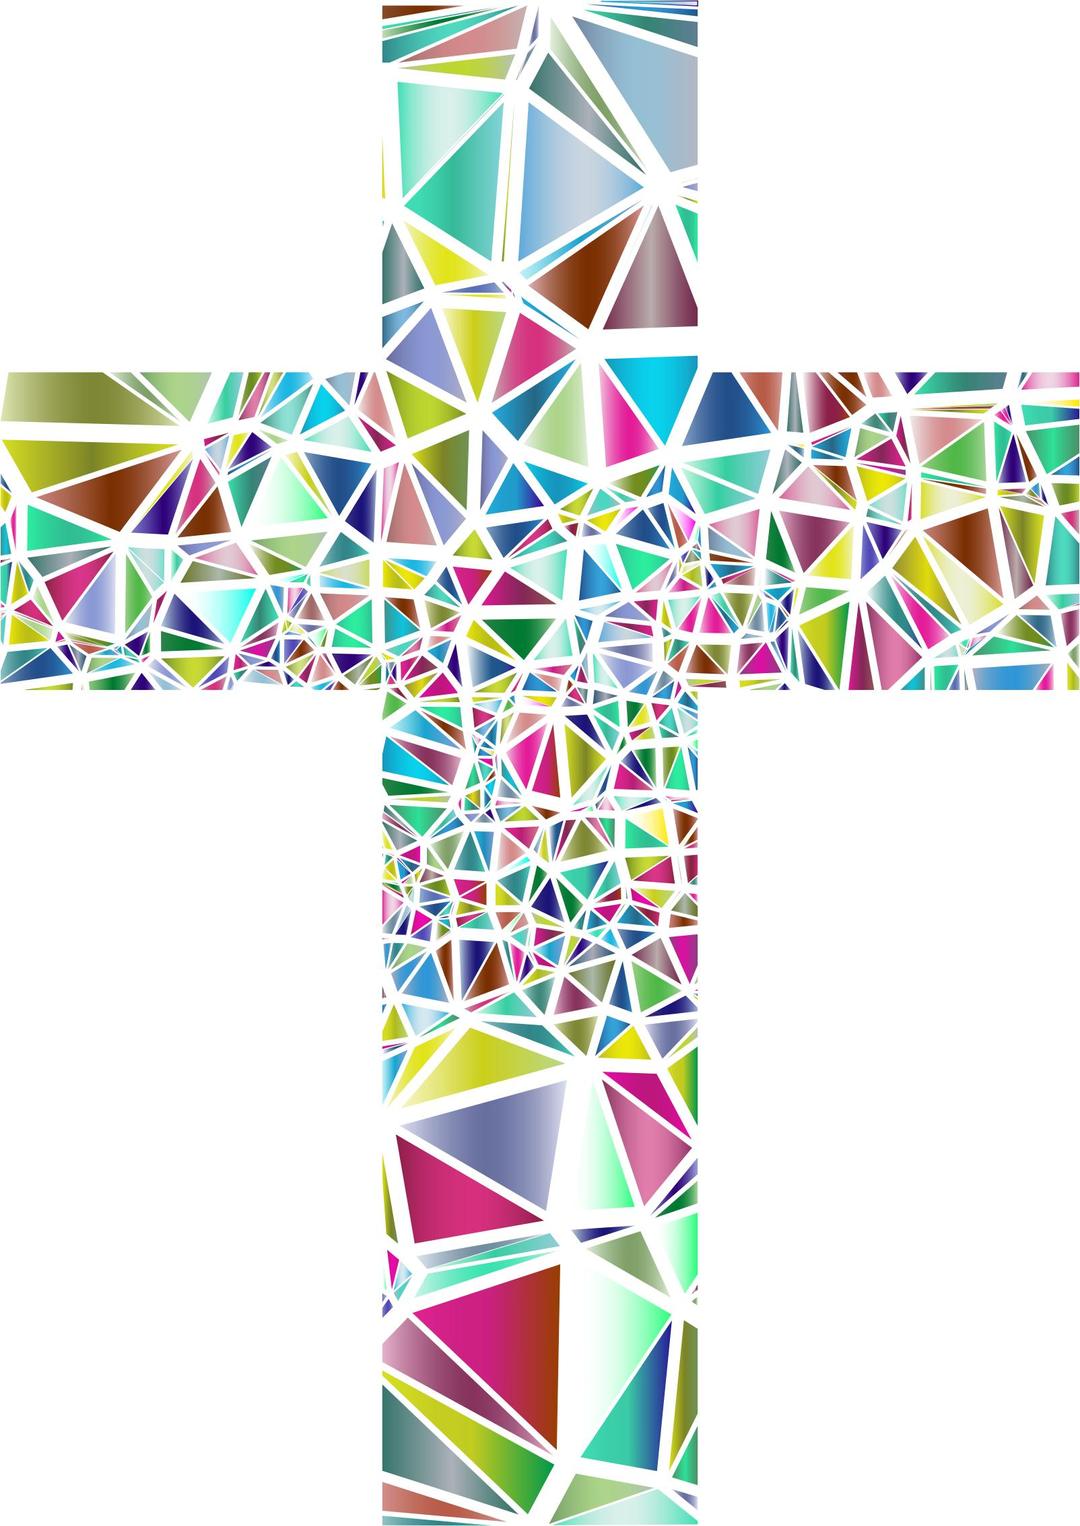 Low Poly Stained Glass Cross 3 No Background png transparent